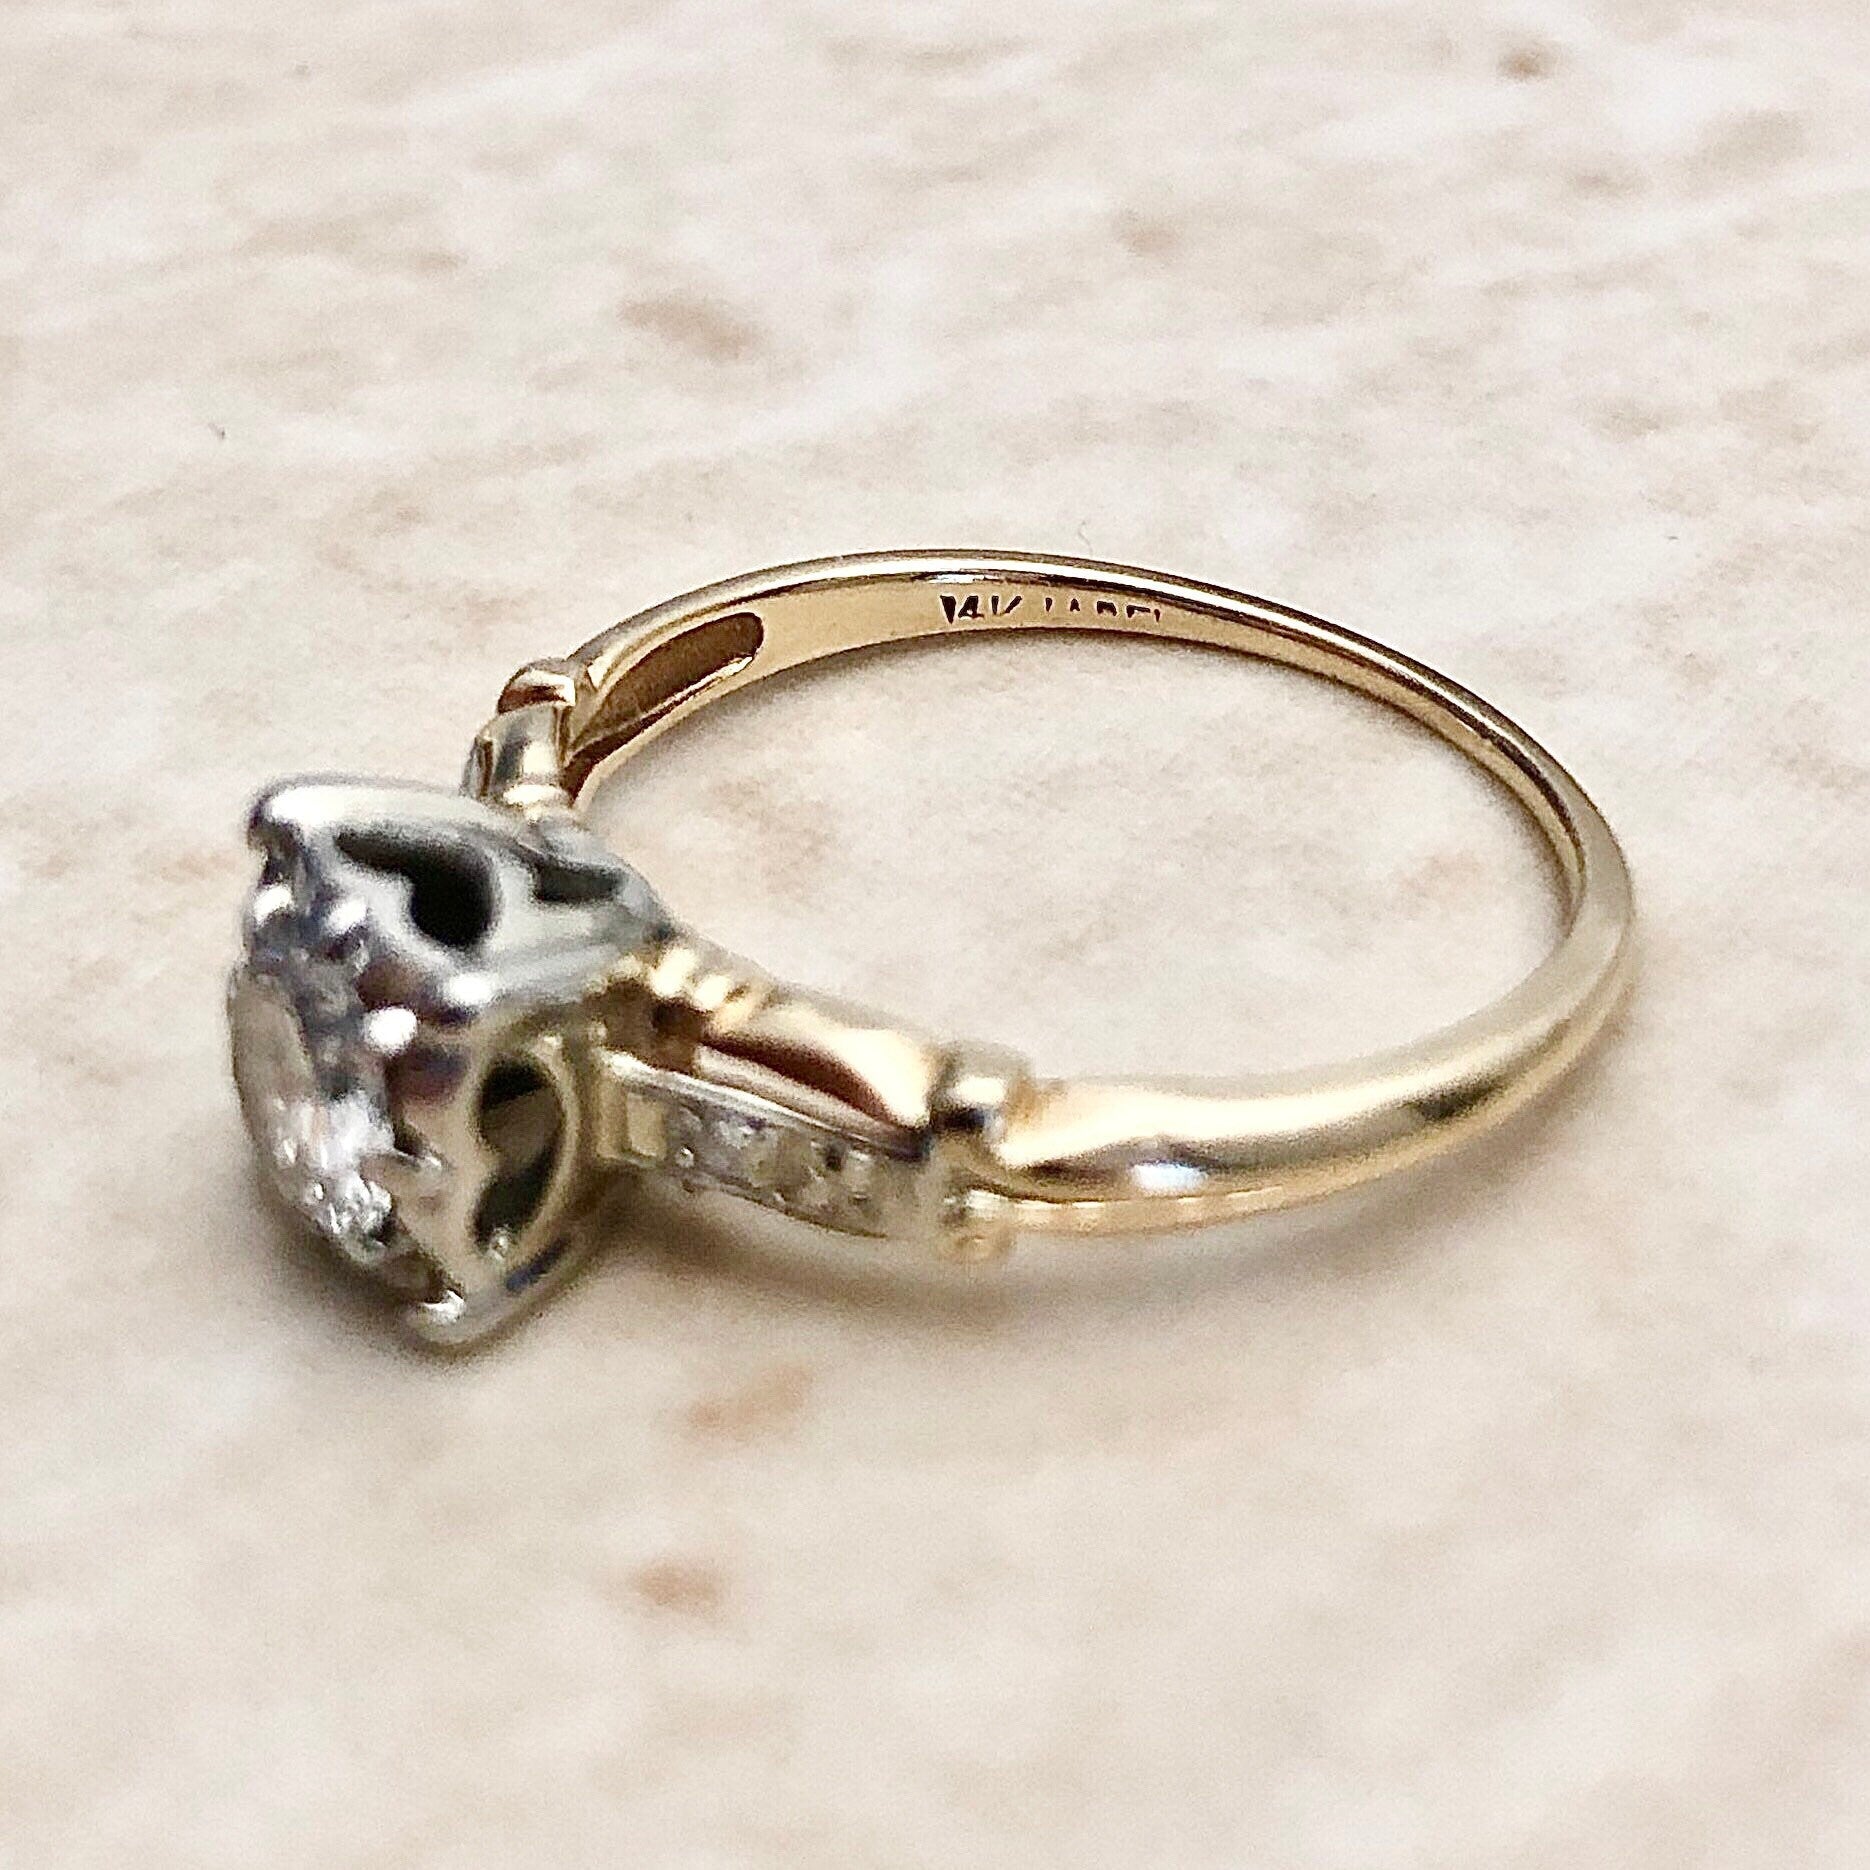 Vintage Retro Diamond Engagement Ring 0.57 CT - Circa 1940 -  14K Two Tone Gold - Vintage Solitaire - Wedding Ring - Bridal Jewelry